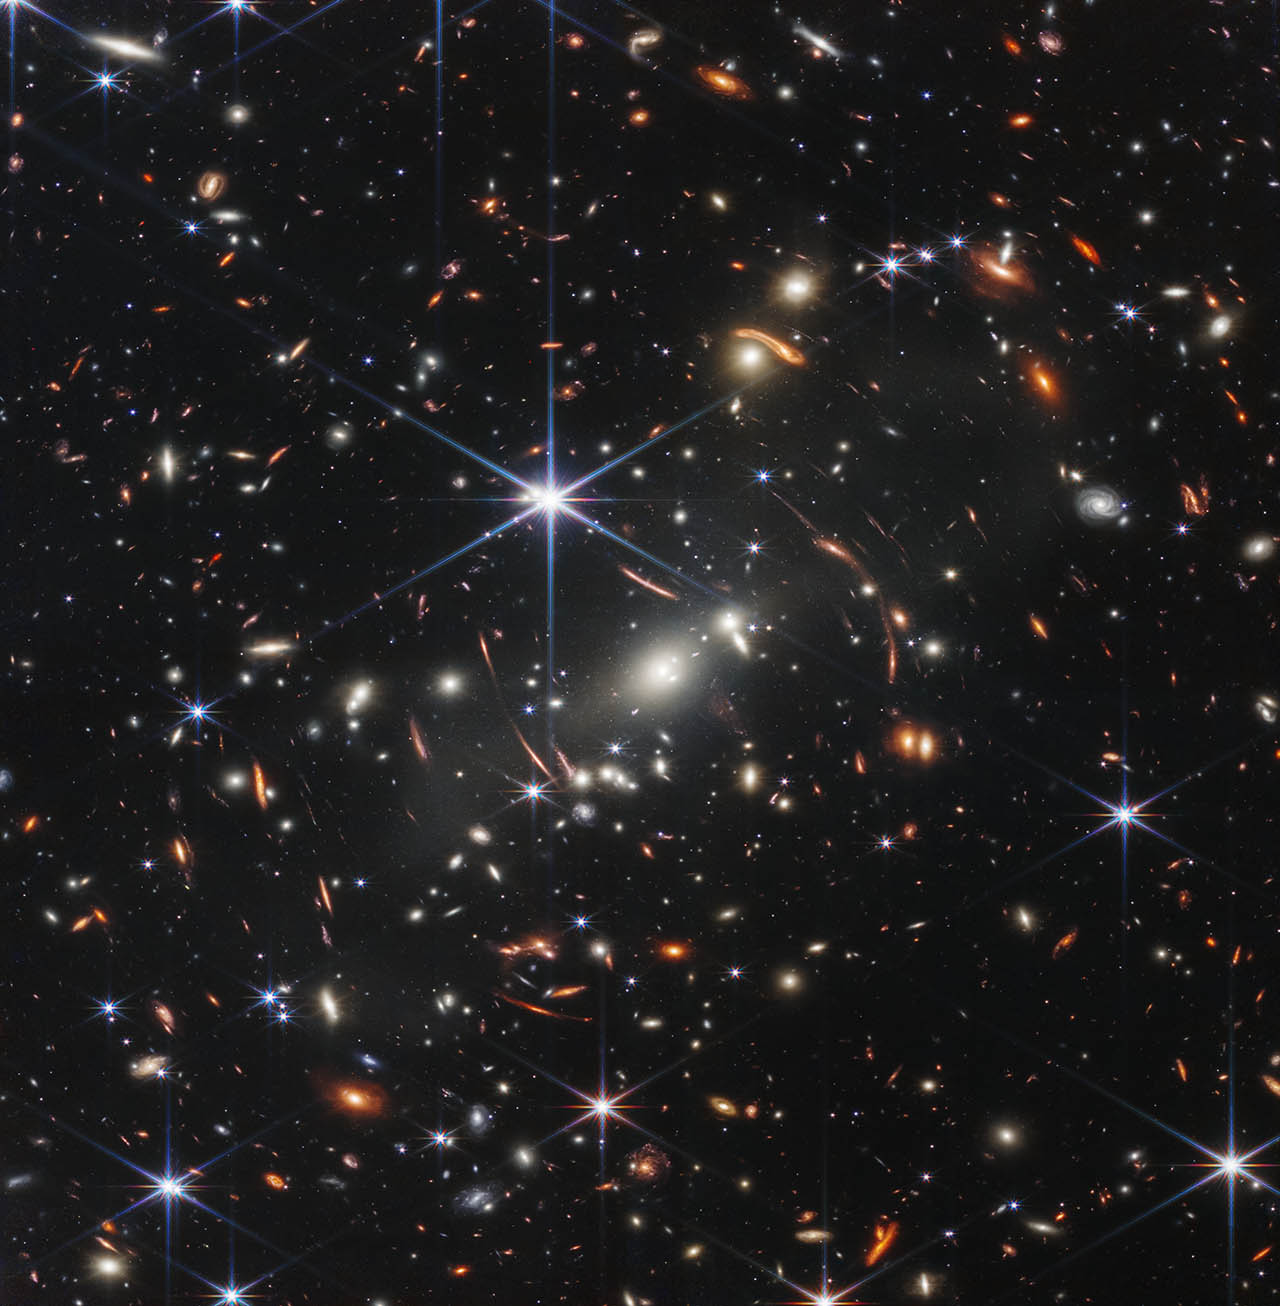 NASA’s James Webb Space Telescope has produced the deepest and sharpest infrared image of the distant universe to date. Known as Webb’s First Deep Field, this image of galaxy cluster SMACS 0723 is overflowing with detail.